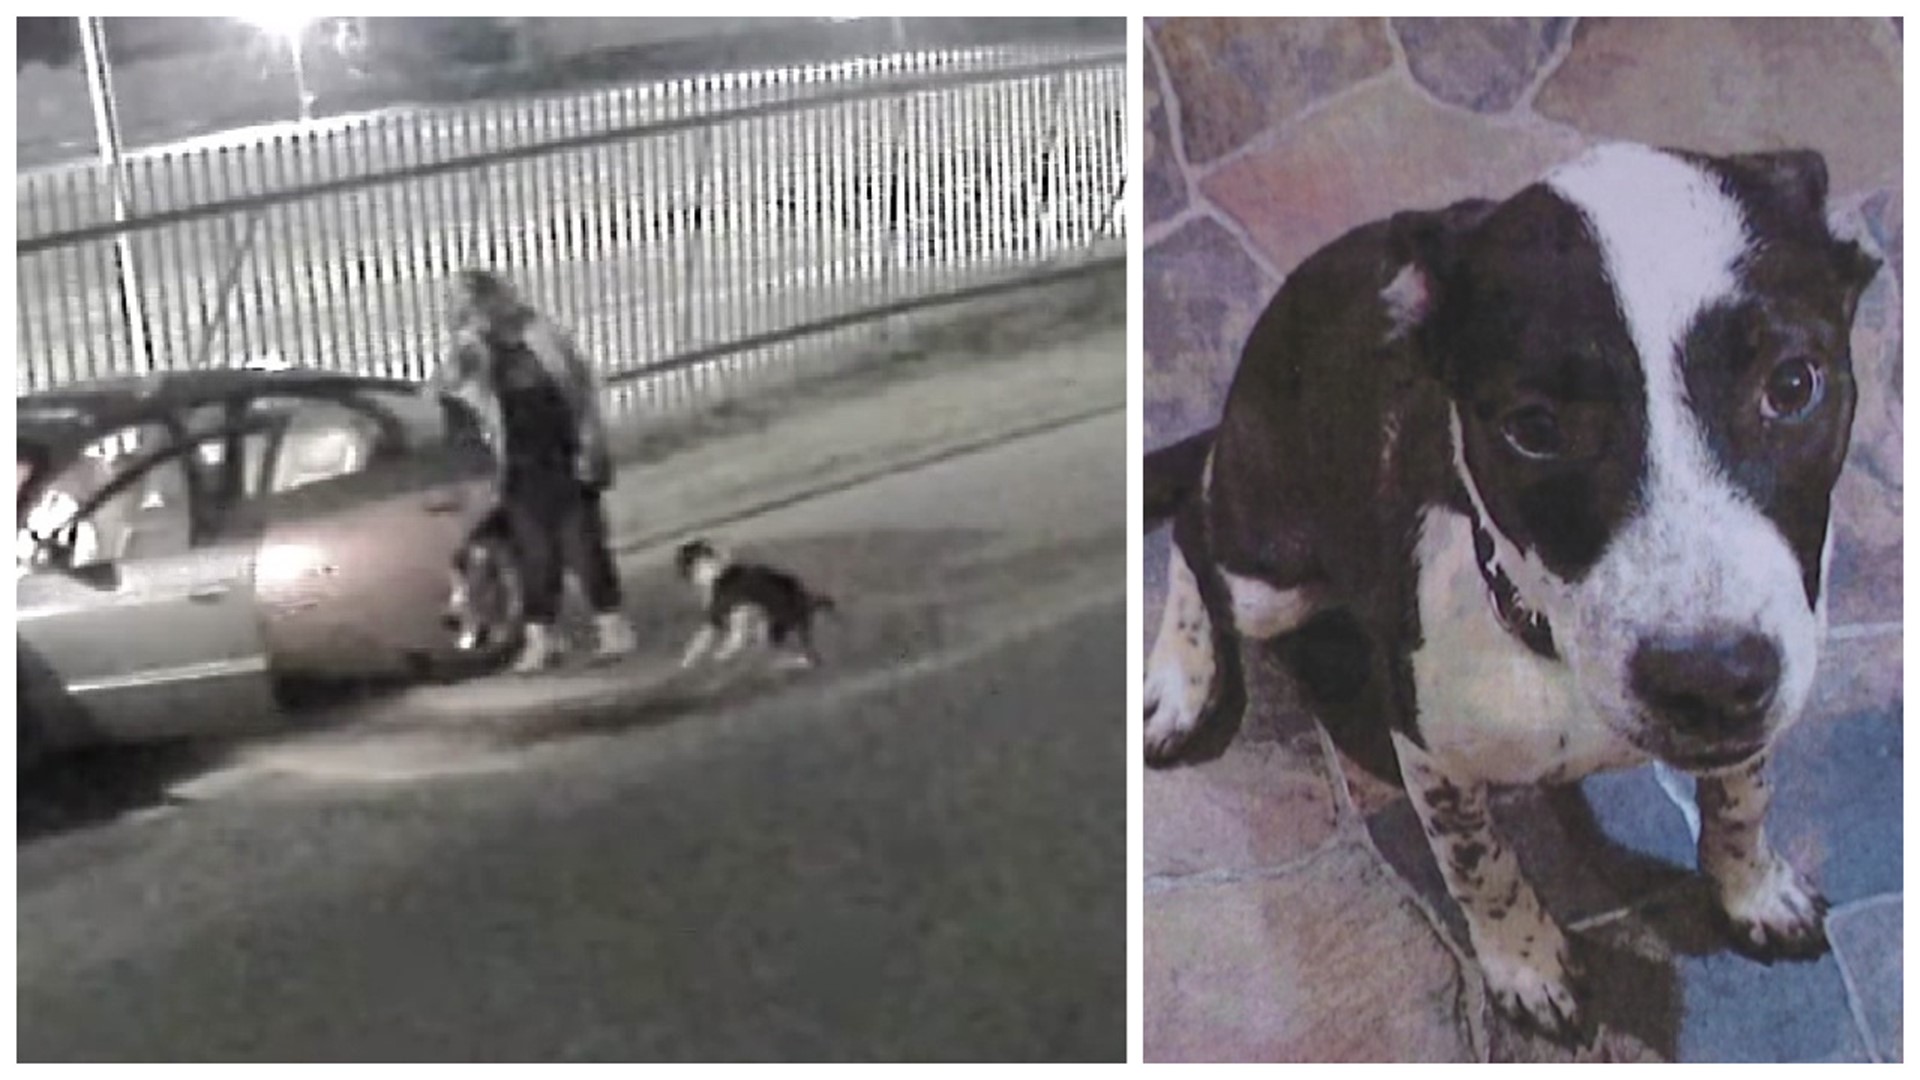 Neighbors in one part of Scranton discovered a dog seemingly abandoned over the weekend and were shocked when they checked their surveillance cameras.